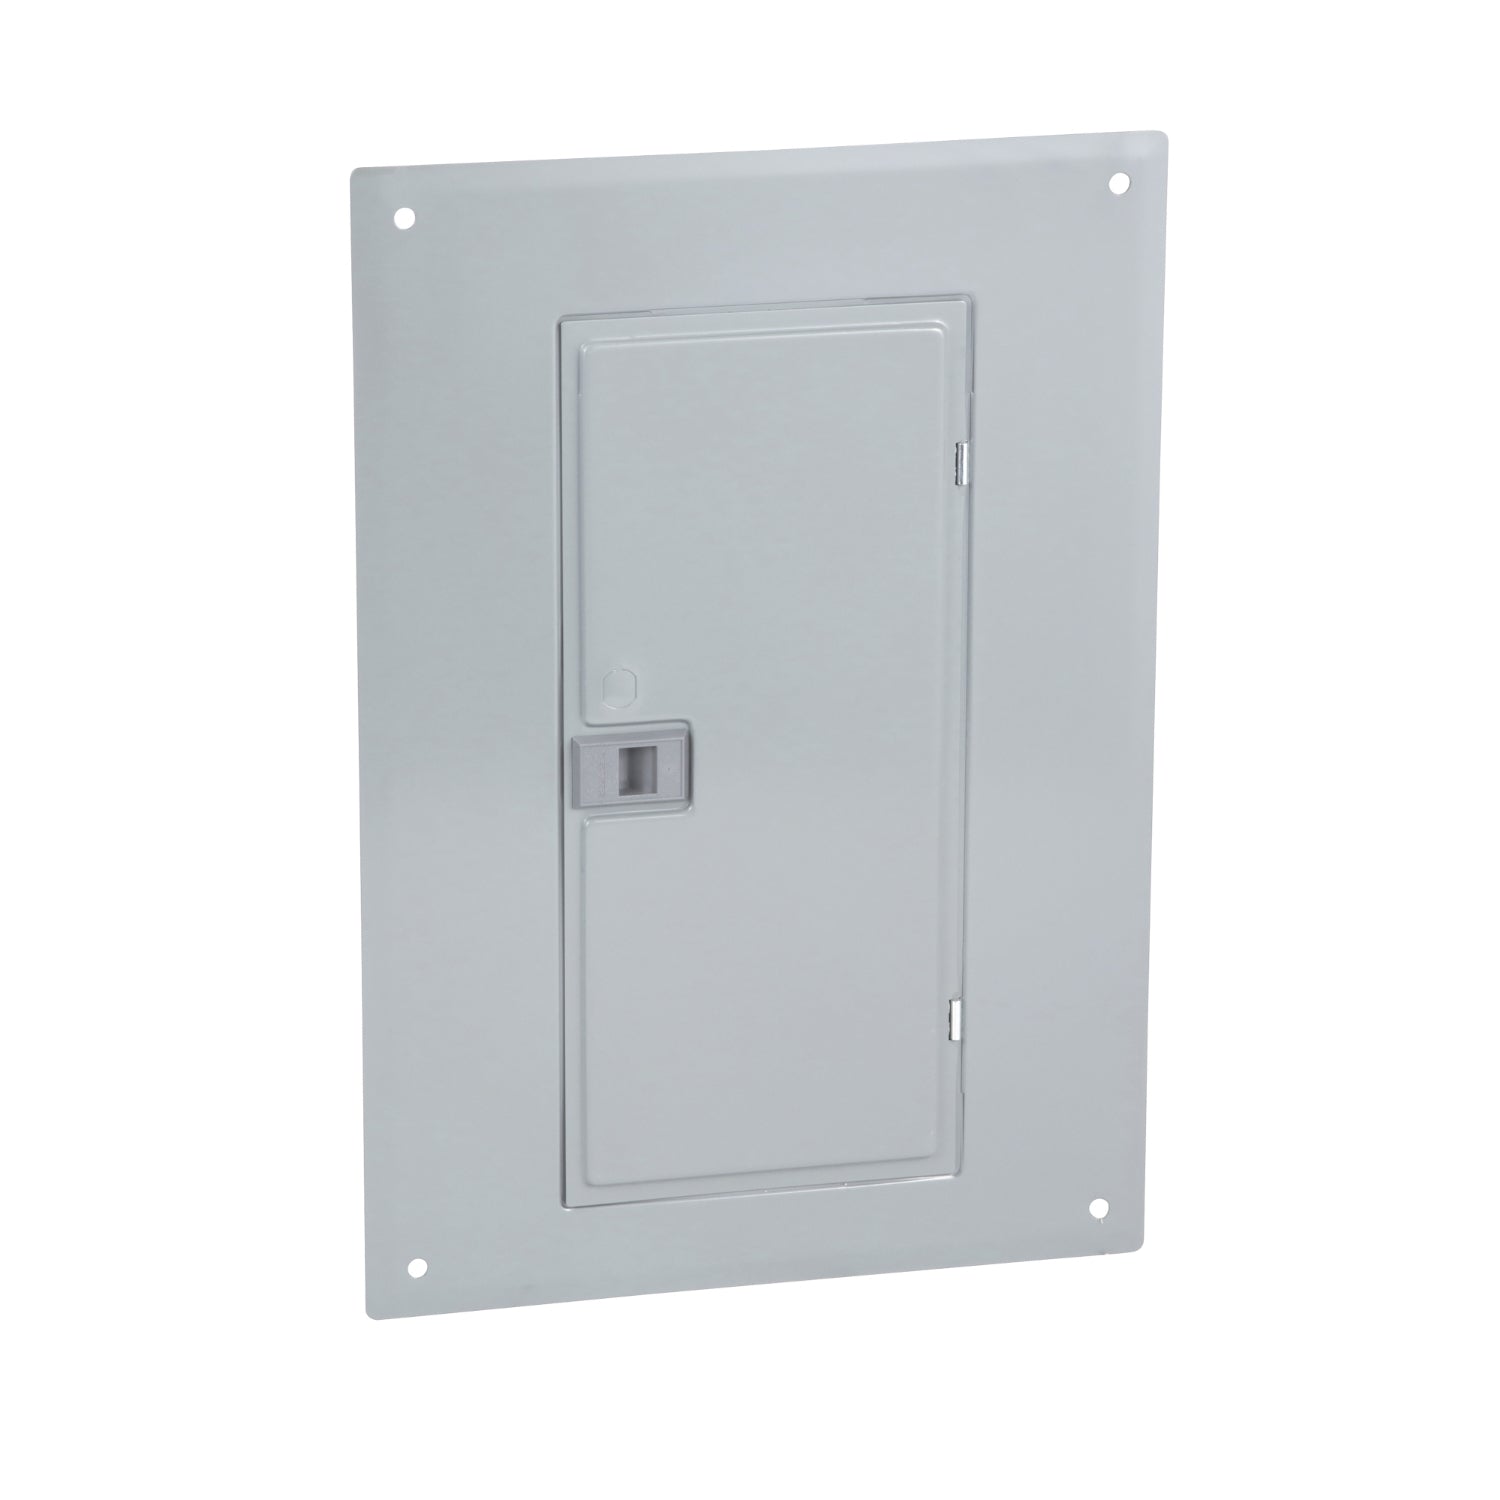 Circuit Panel Covers - Multiple Sizes